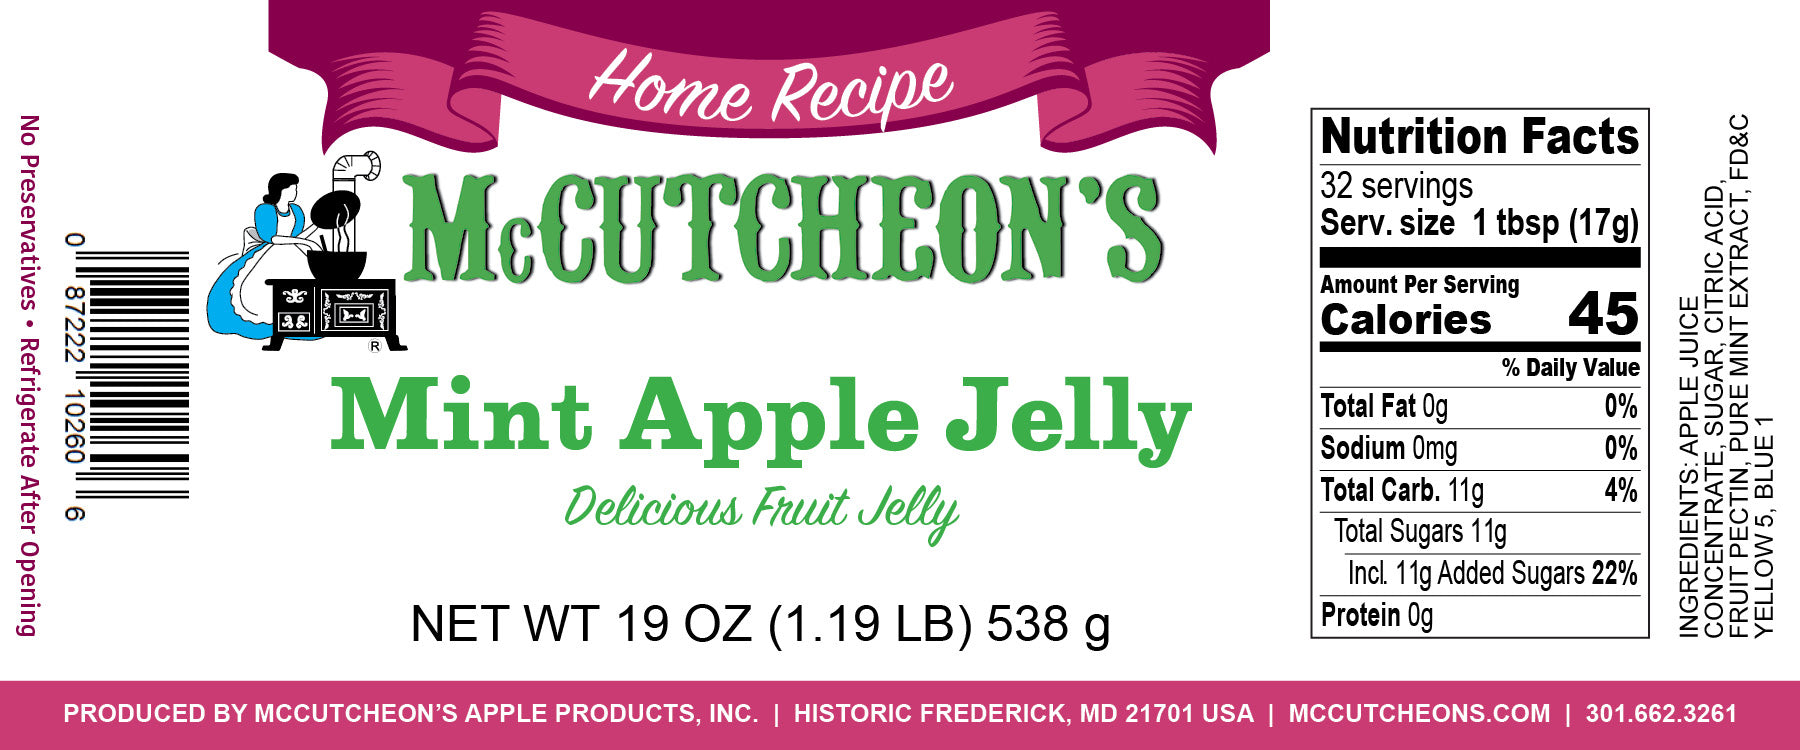 nutrition label for McCutcheon's mint apple jelly